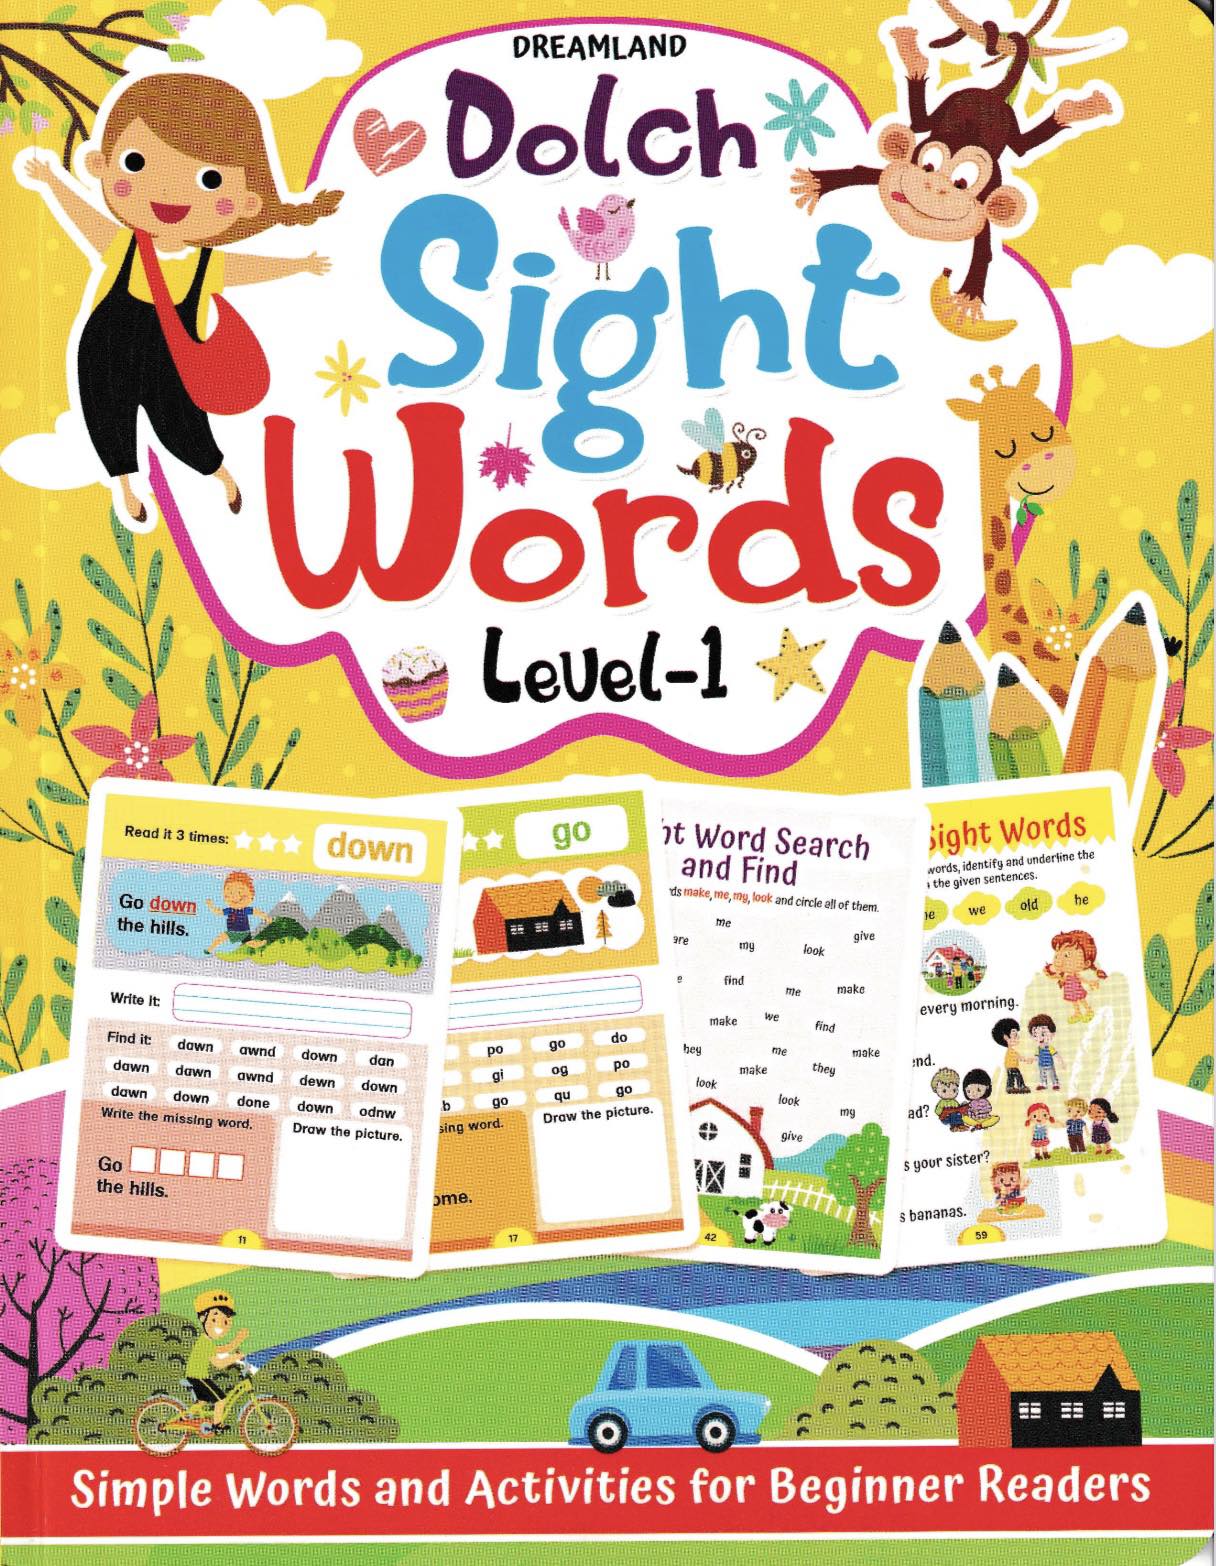 Dolch Sight Words Level 1 to 4